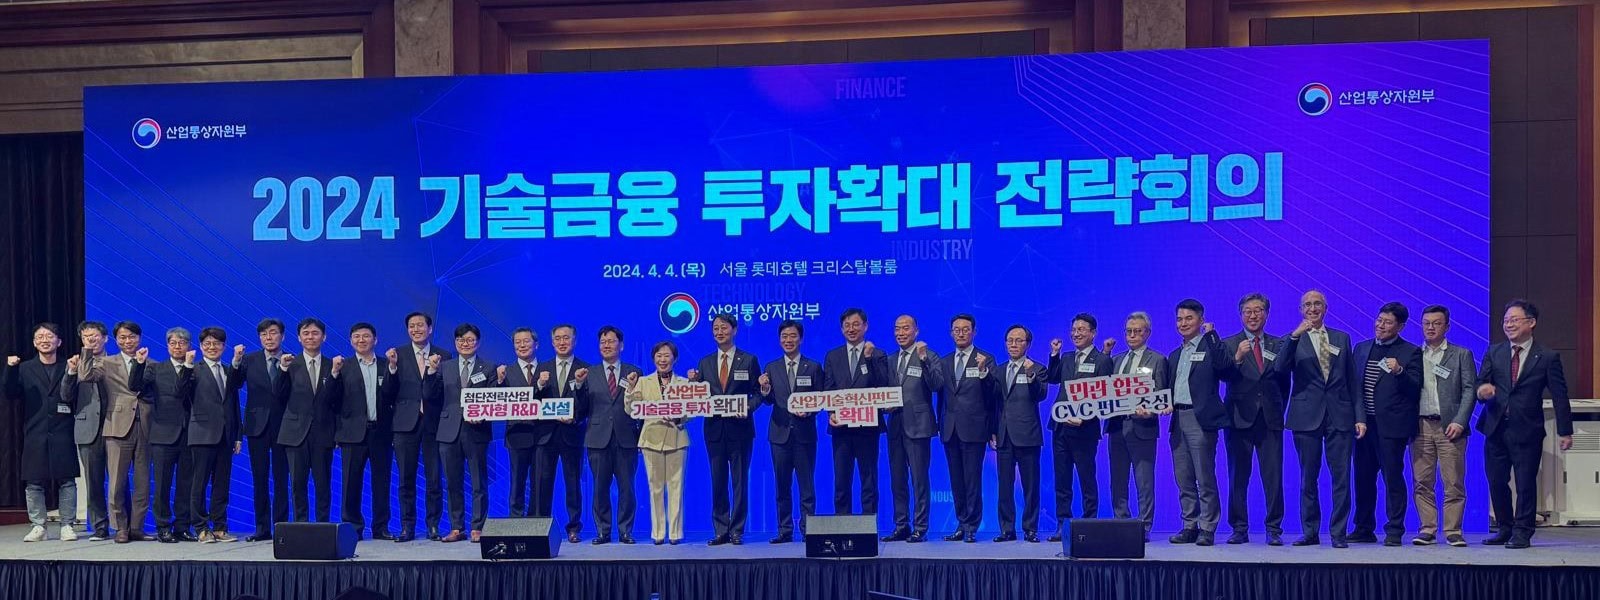 An April event in Seoul announcing billions of dollars of funding for the innovation ecosystem in South Korea. Photo courtesy of OurCrowd